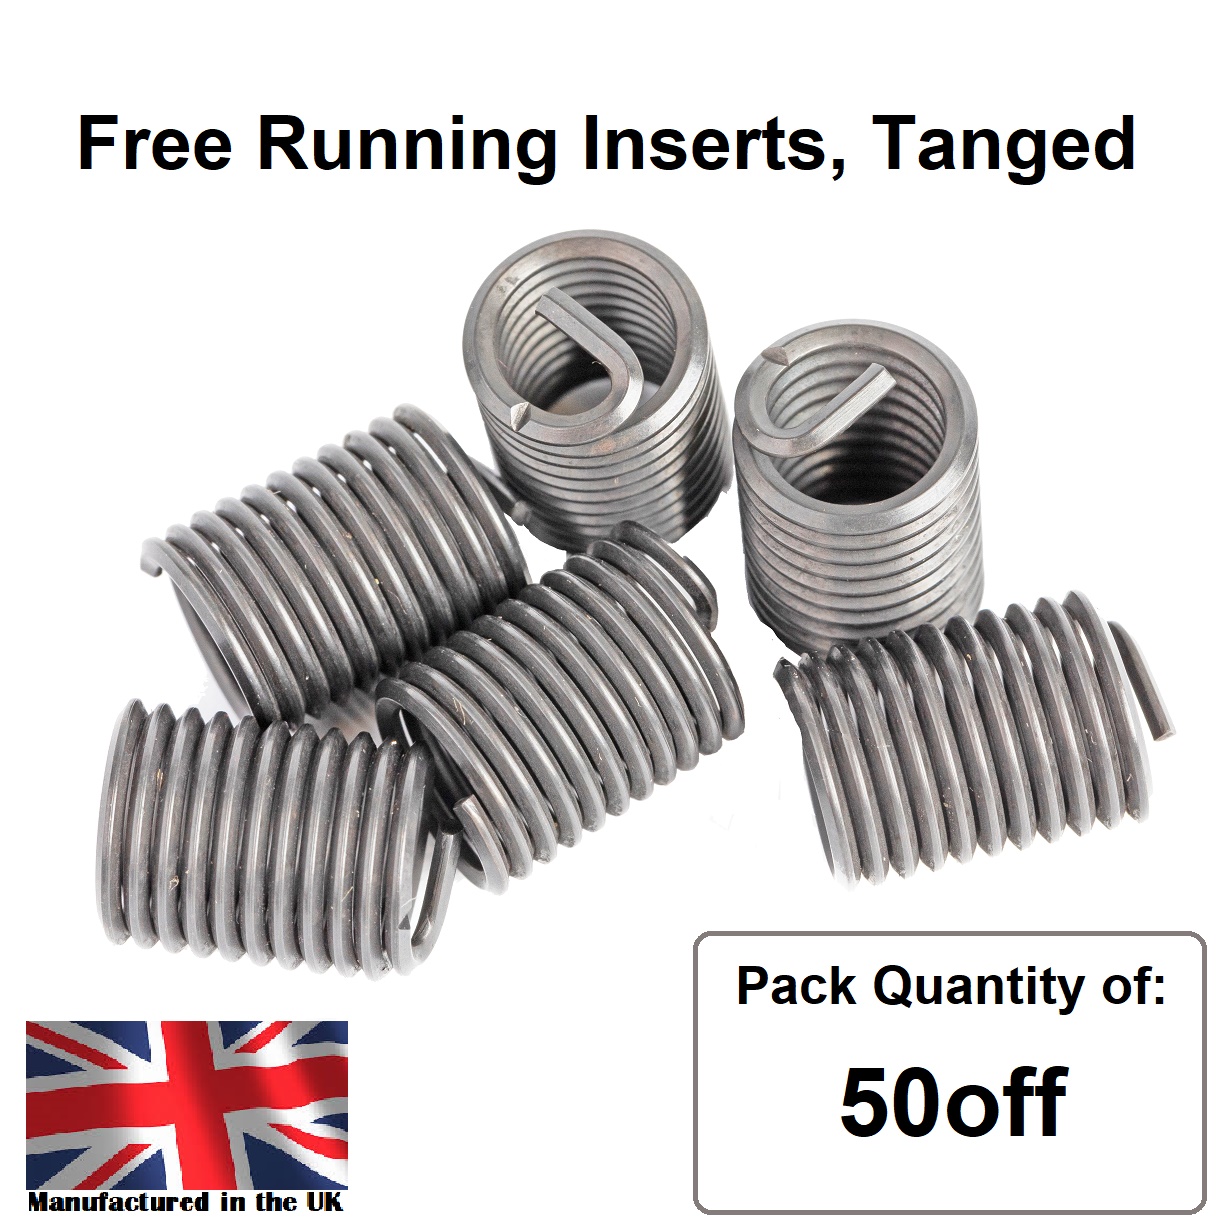 M6 x 1.0 x 1D Metric Coarse, Free Running, Tanged, Wire Thread Repair Insert, 304/A2 Stainless (Pack 50)